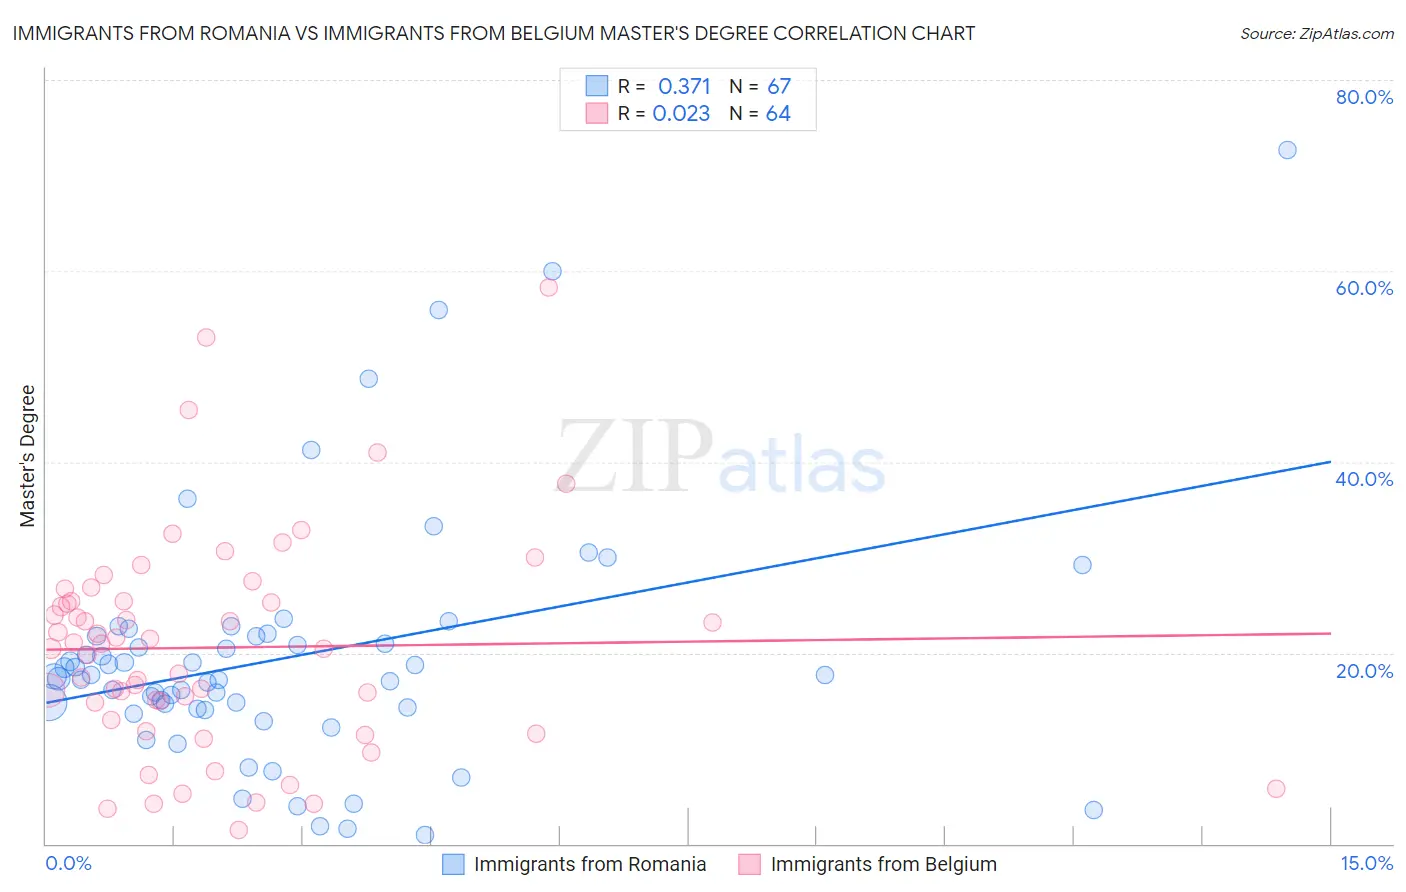 Immigrants from Romania vs Immigrants from Belgium Master's Degree